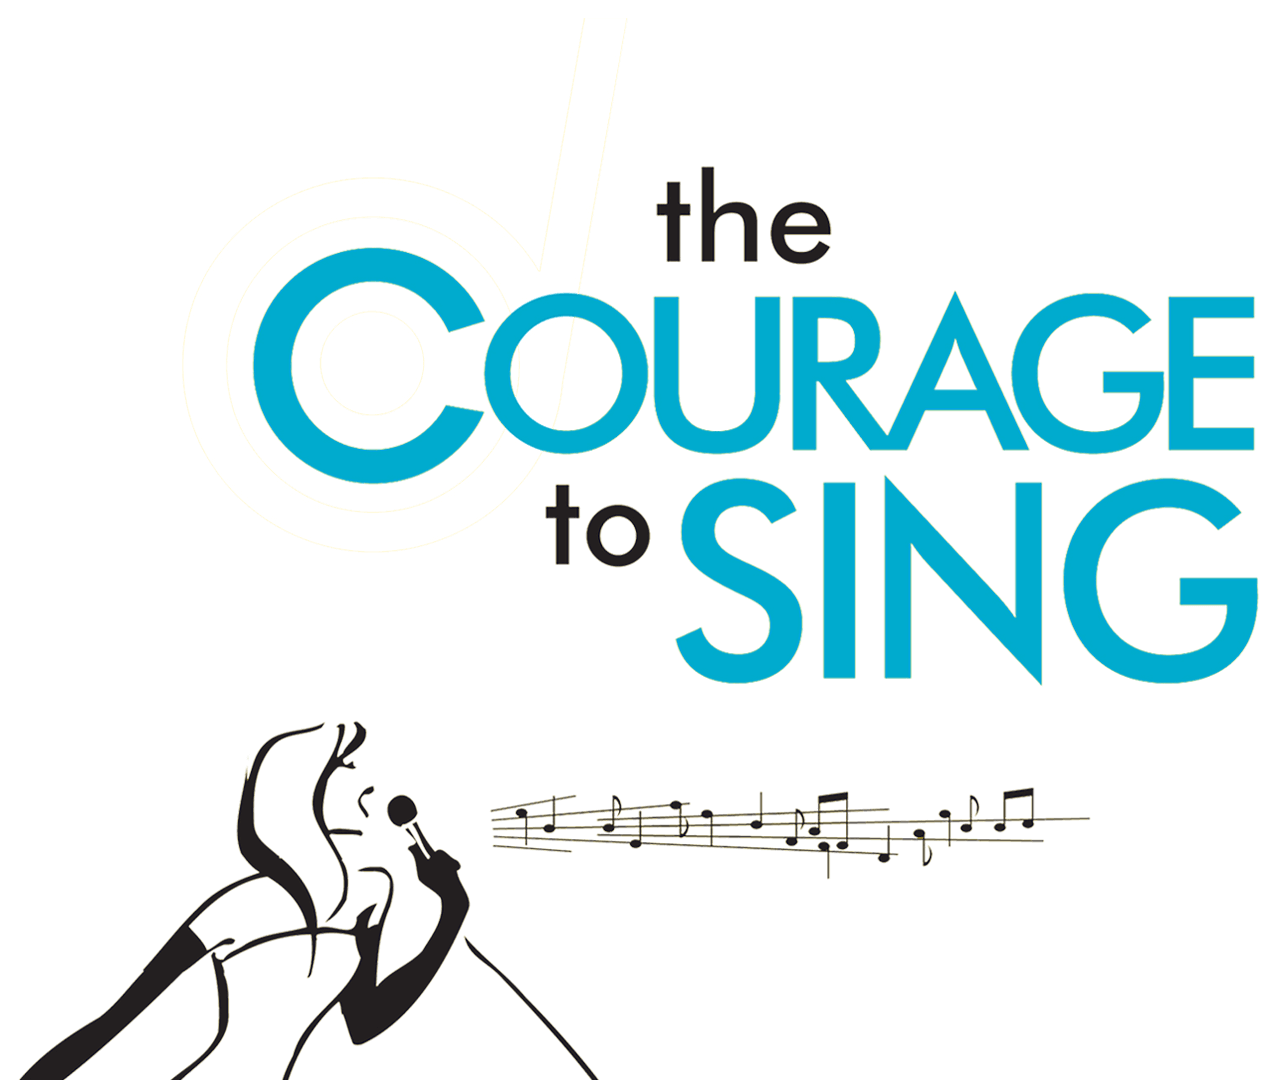 The Courage to Sing